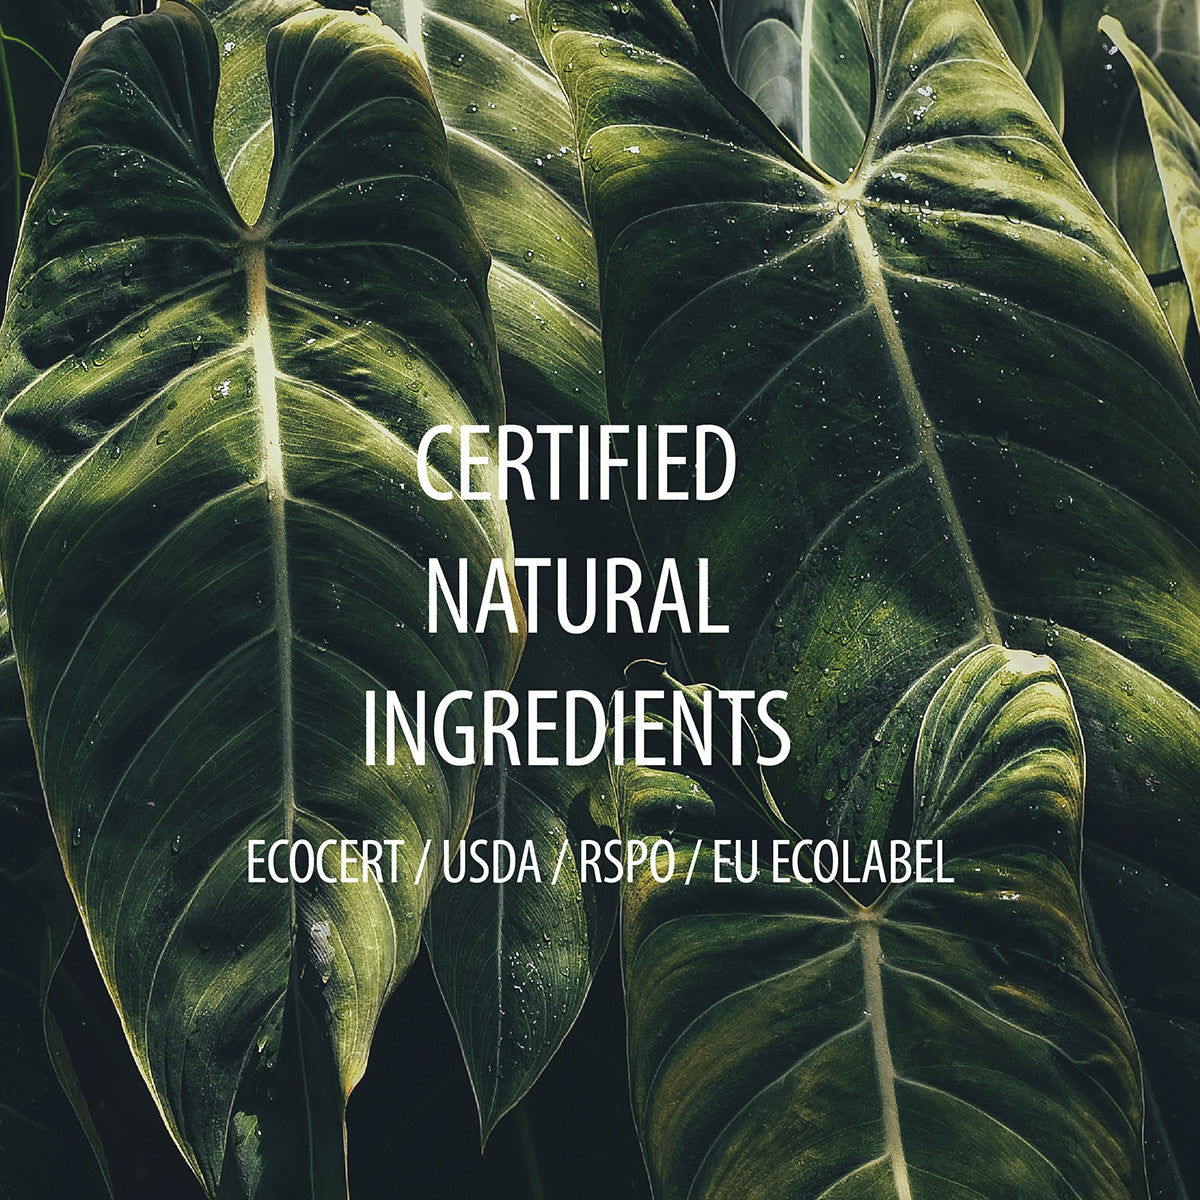 We Carefully Source Certified Natural Ingredients